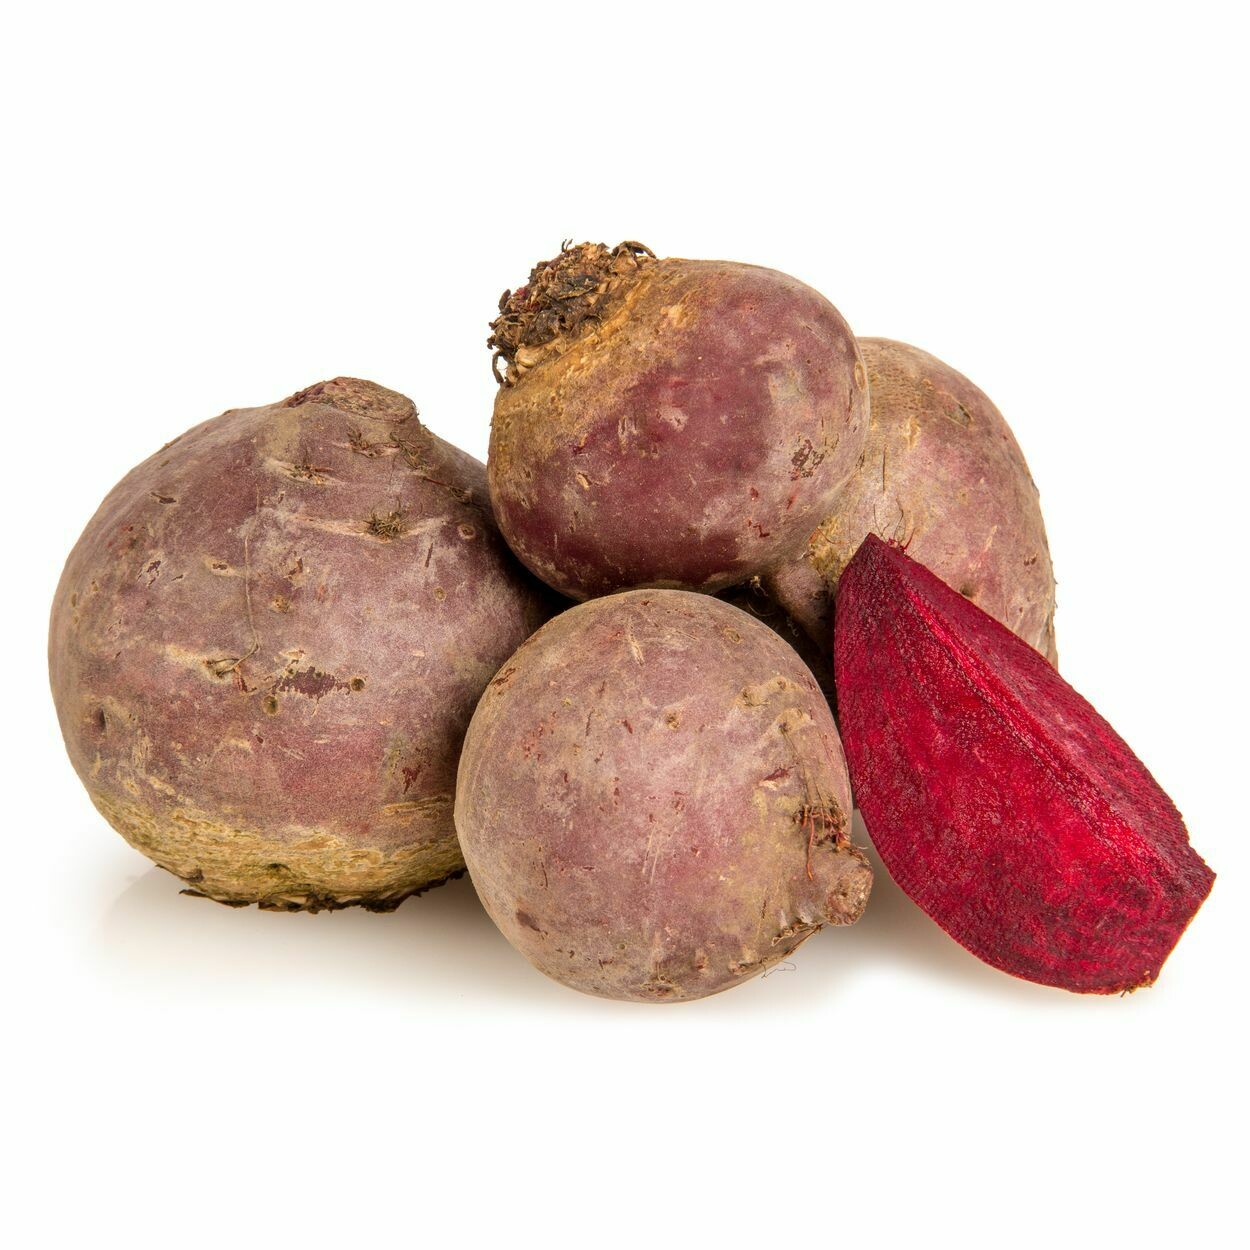 BEETS, RED (2 LBS)